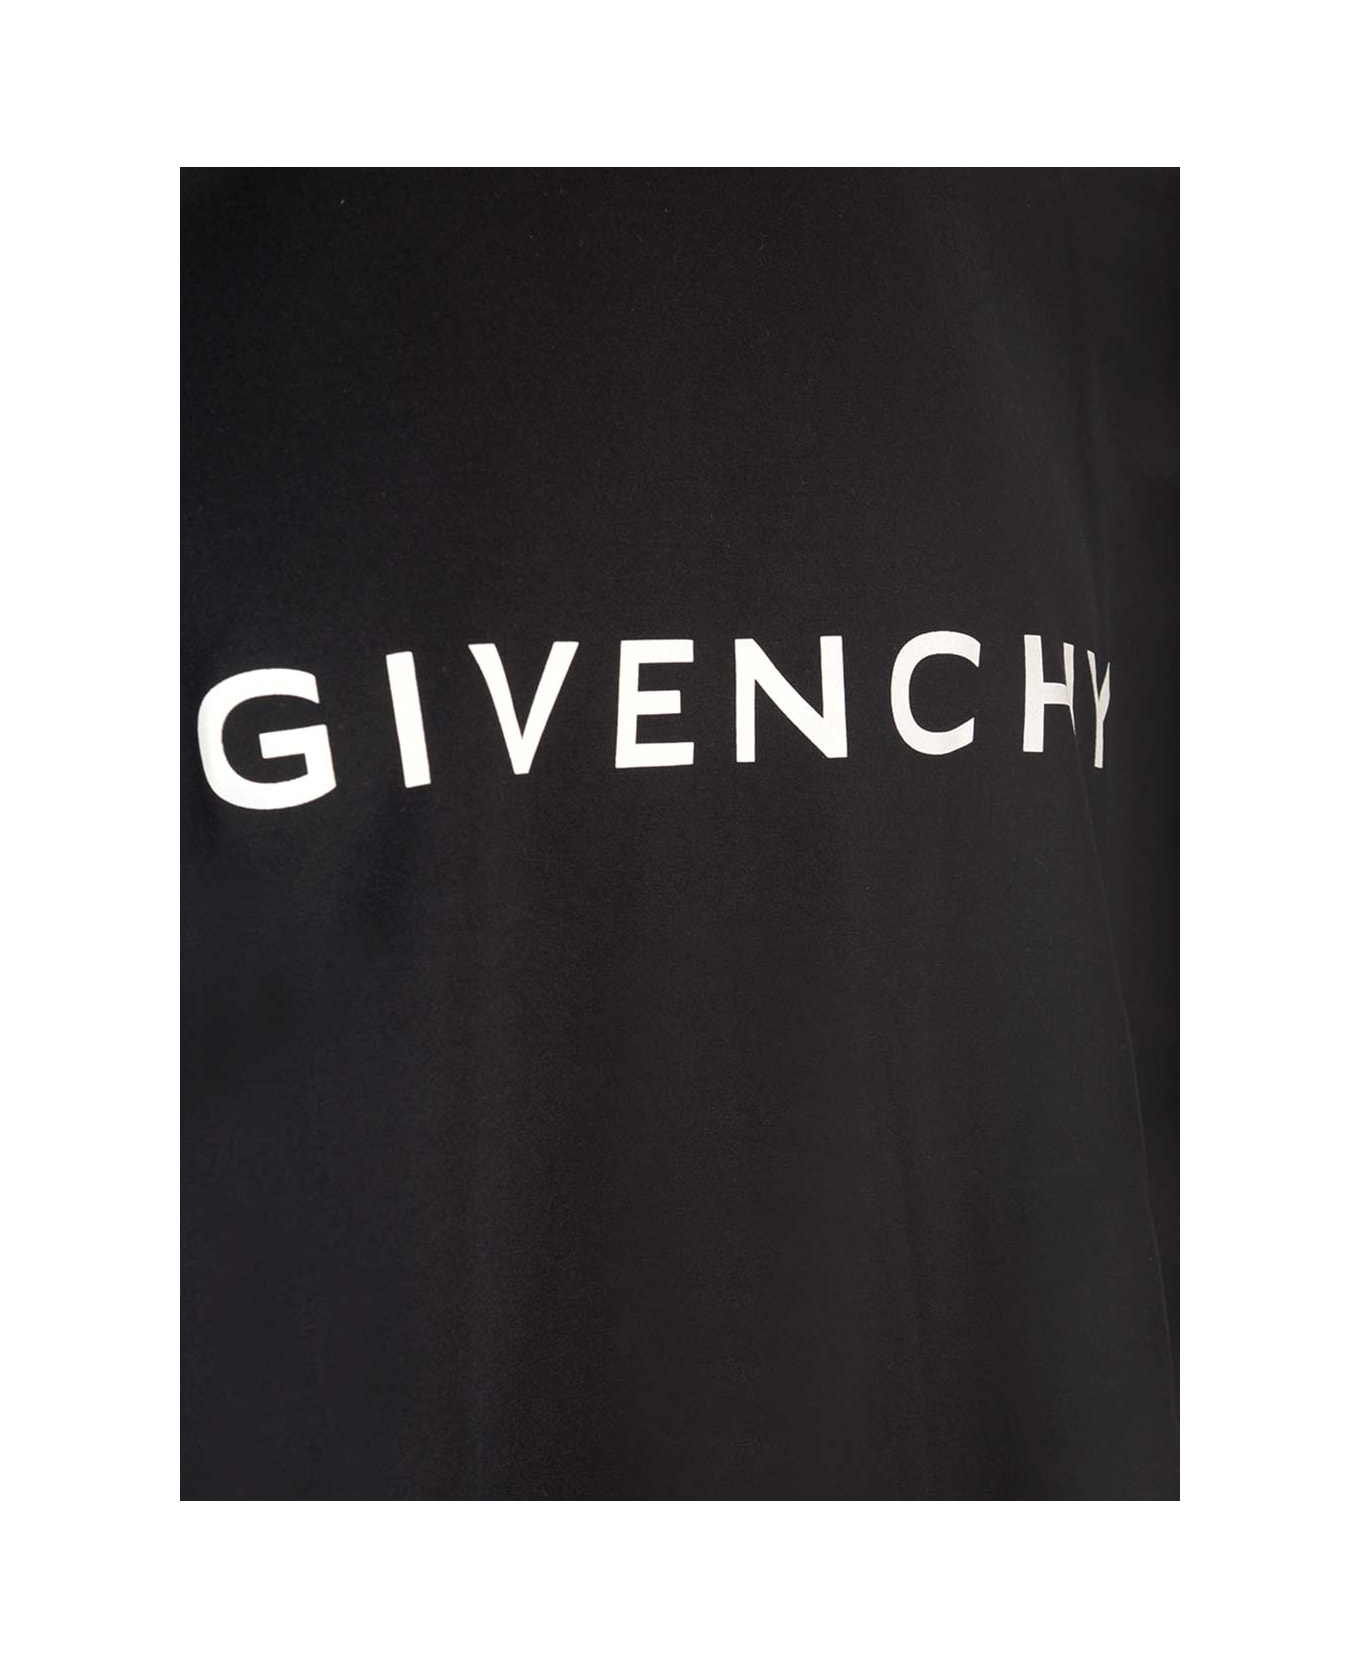 Givenchy Oversized Fit T-shirt - Black